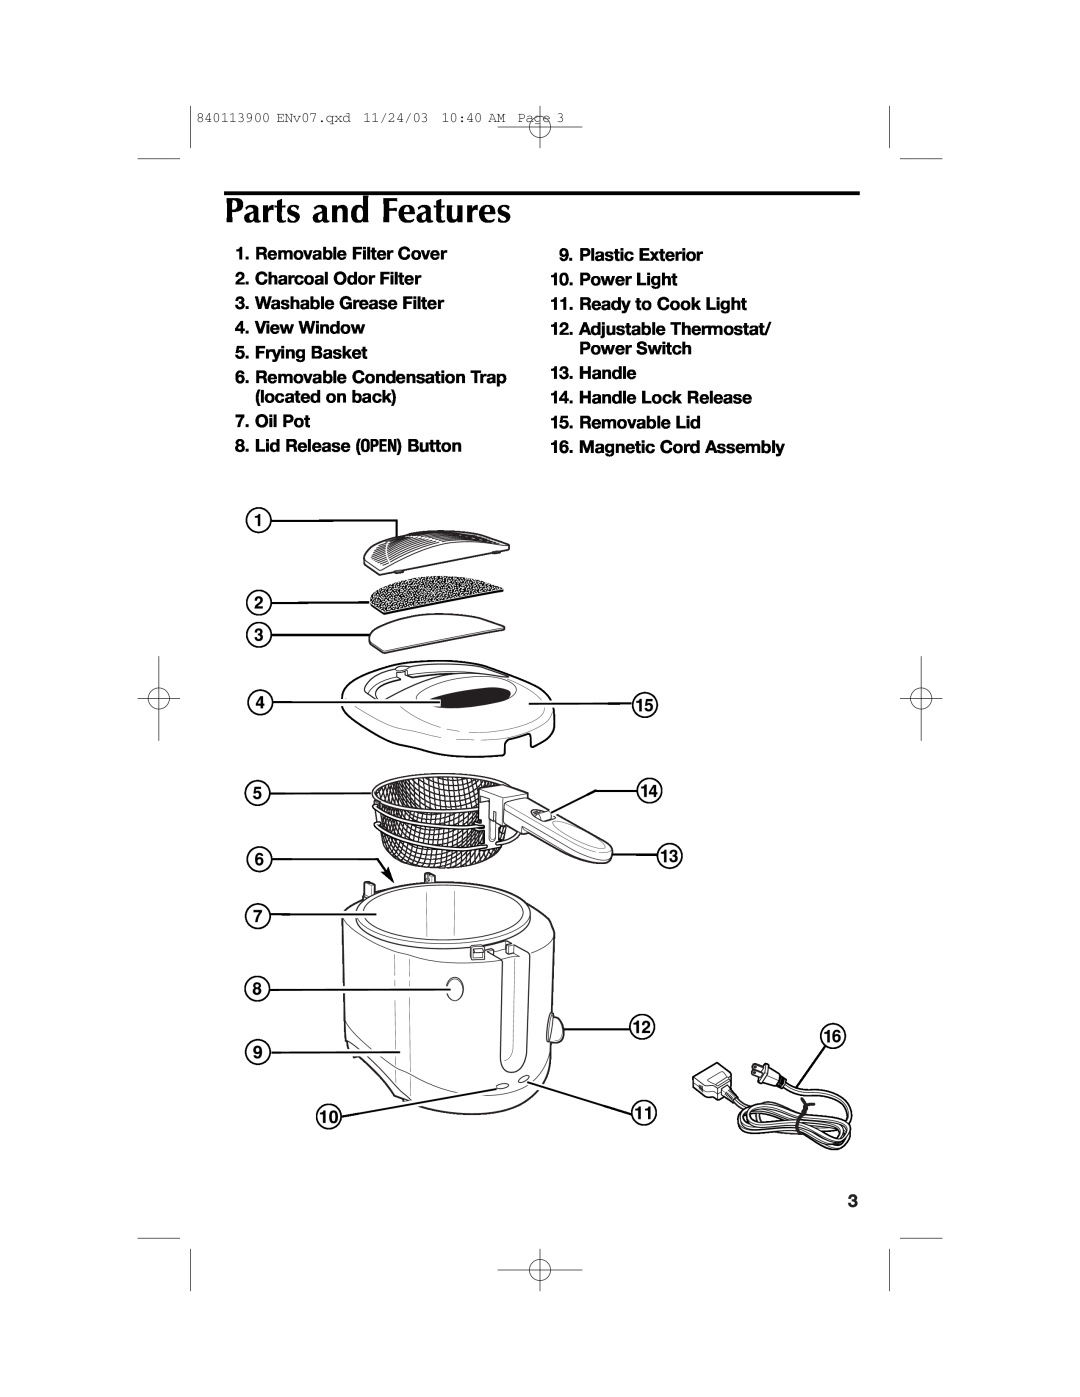 Hamilton Beach 35015 manual Parts and Features 